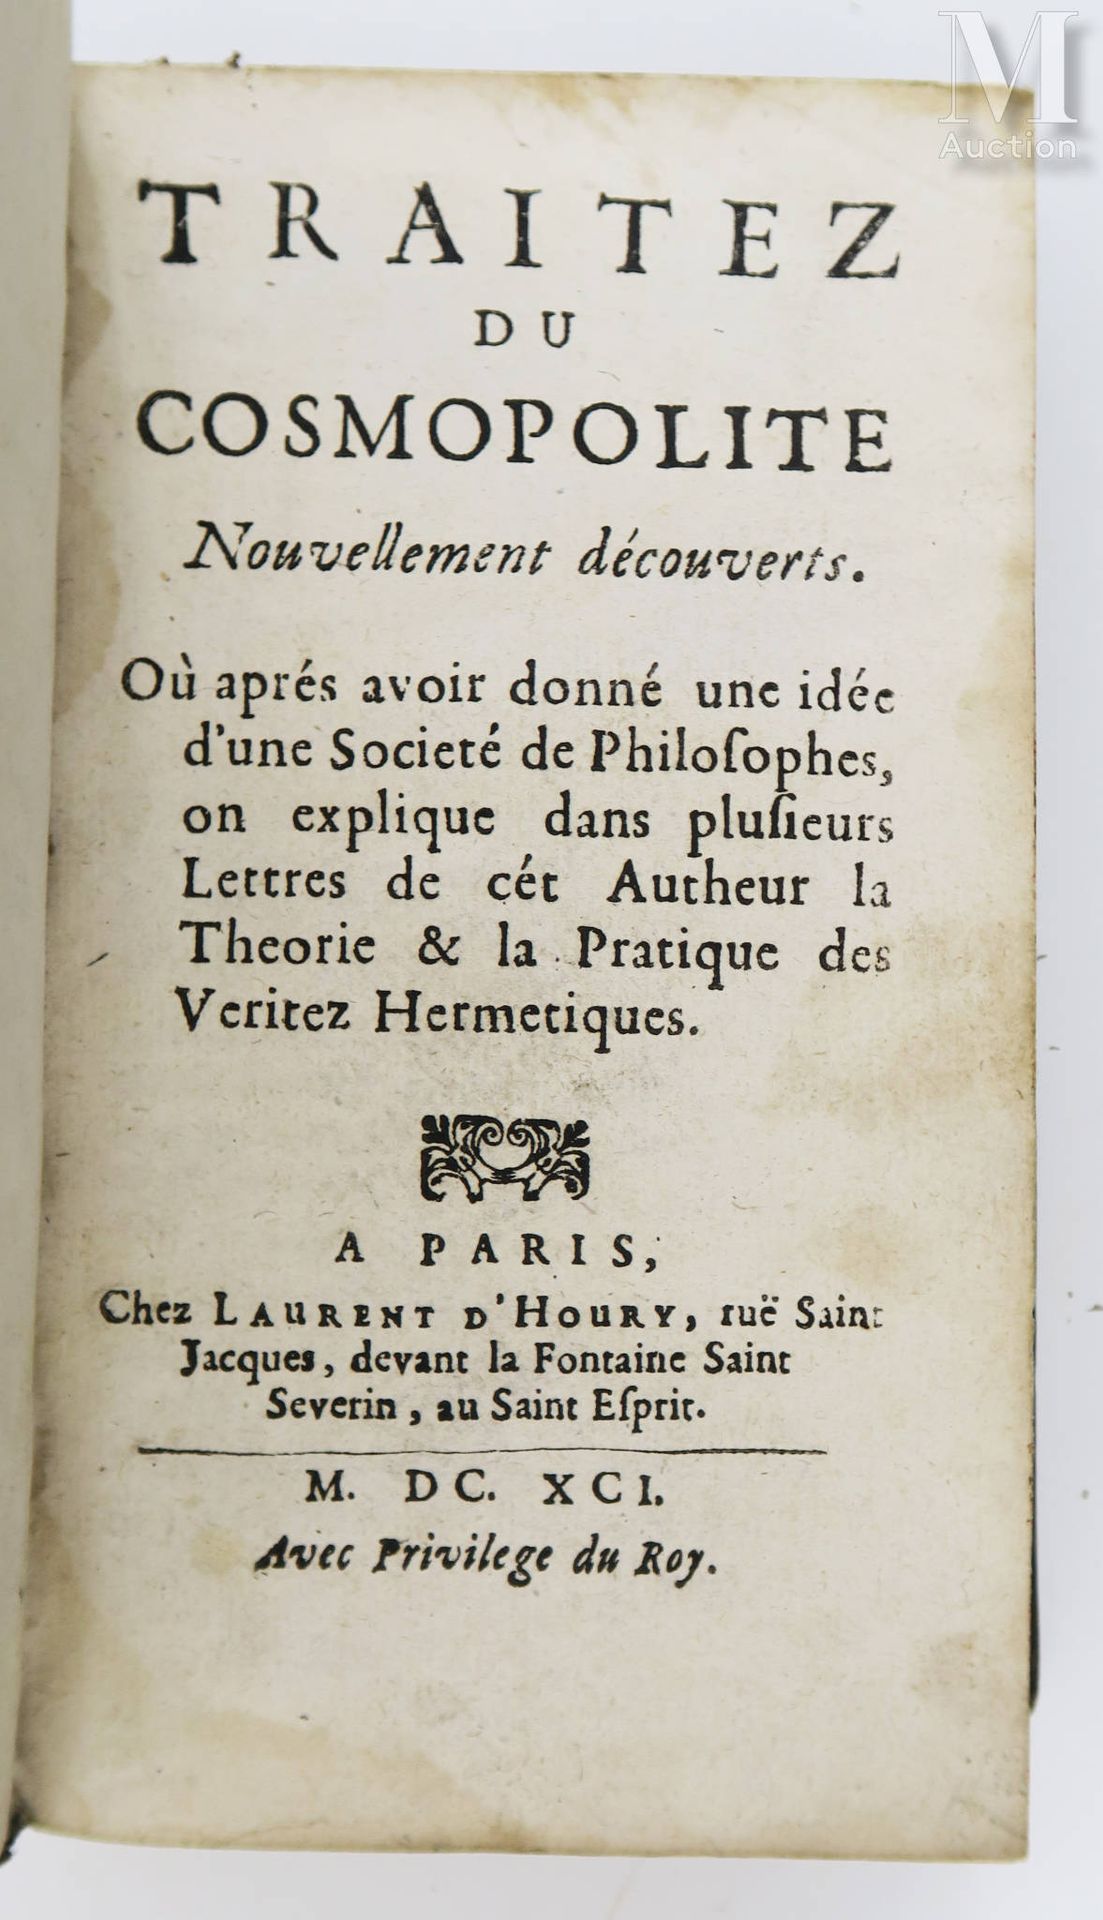 Cosmopolite (Le). Treatises of the Cosmopolitan newly discovered. Where after ha&hellip;